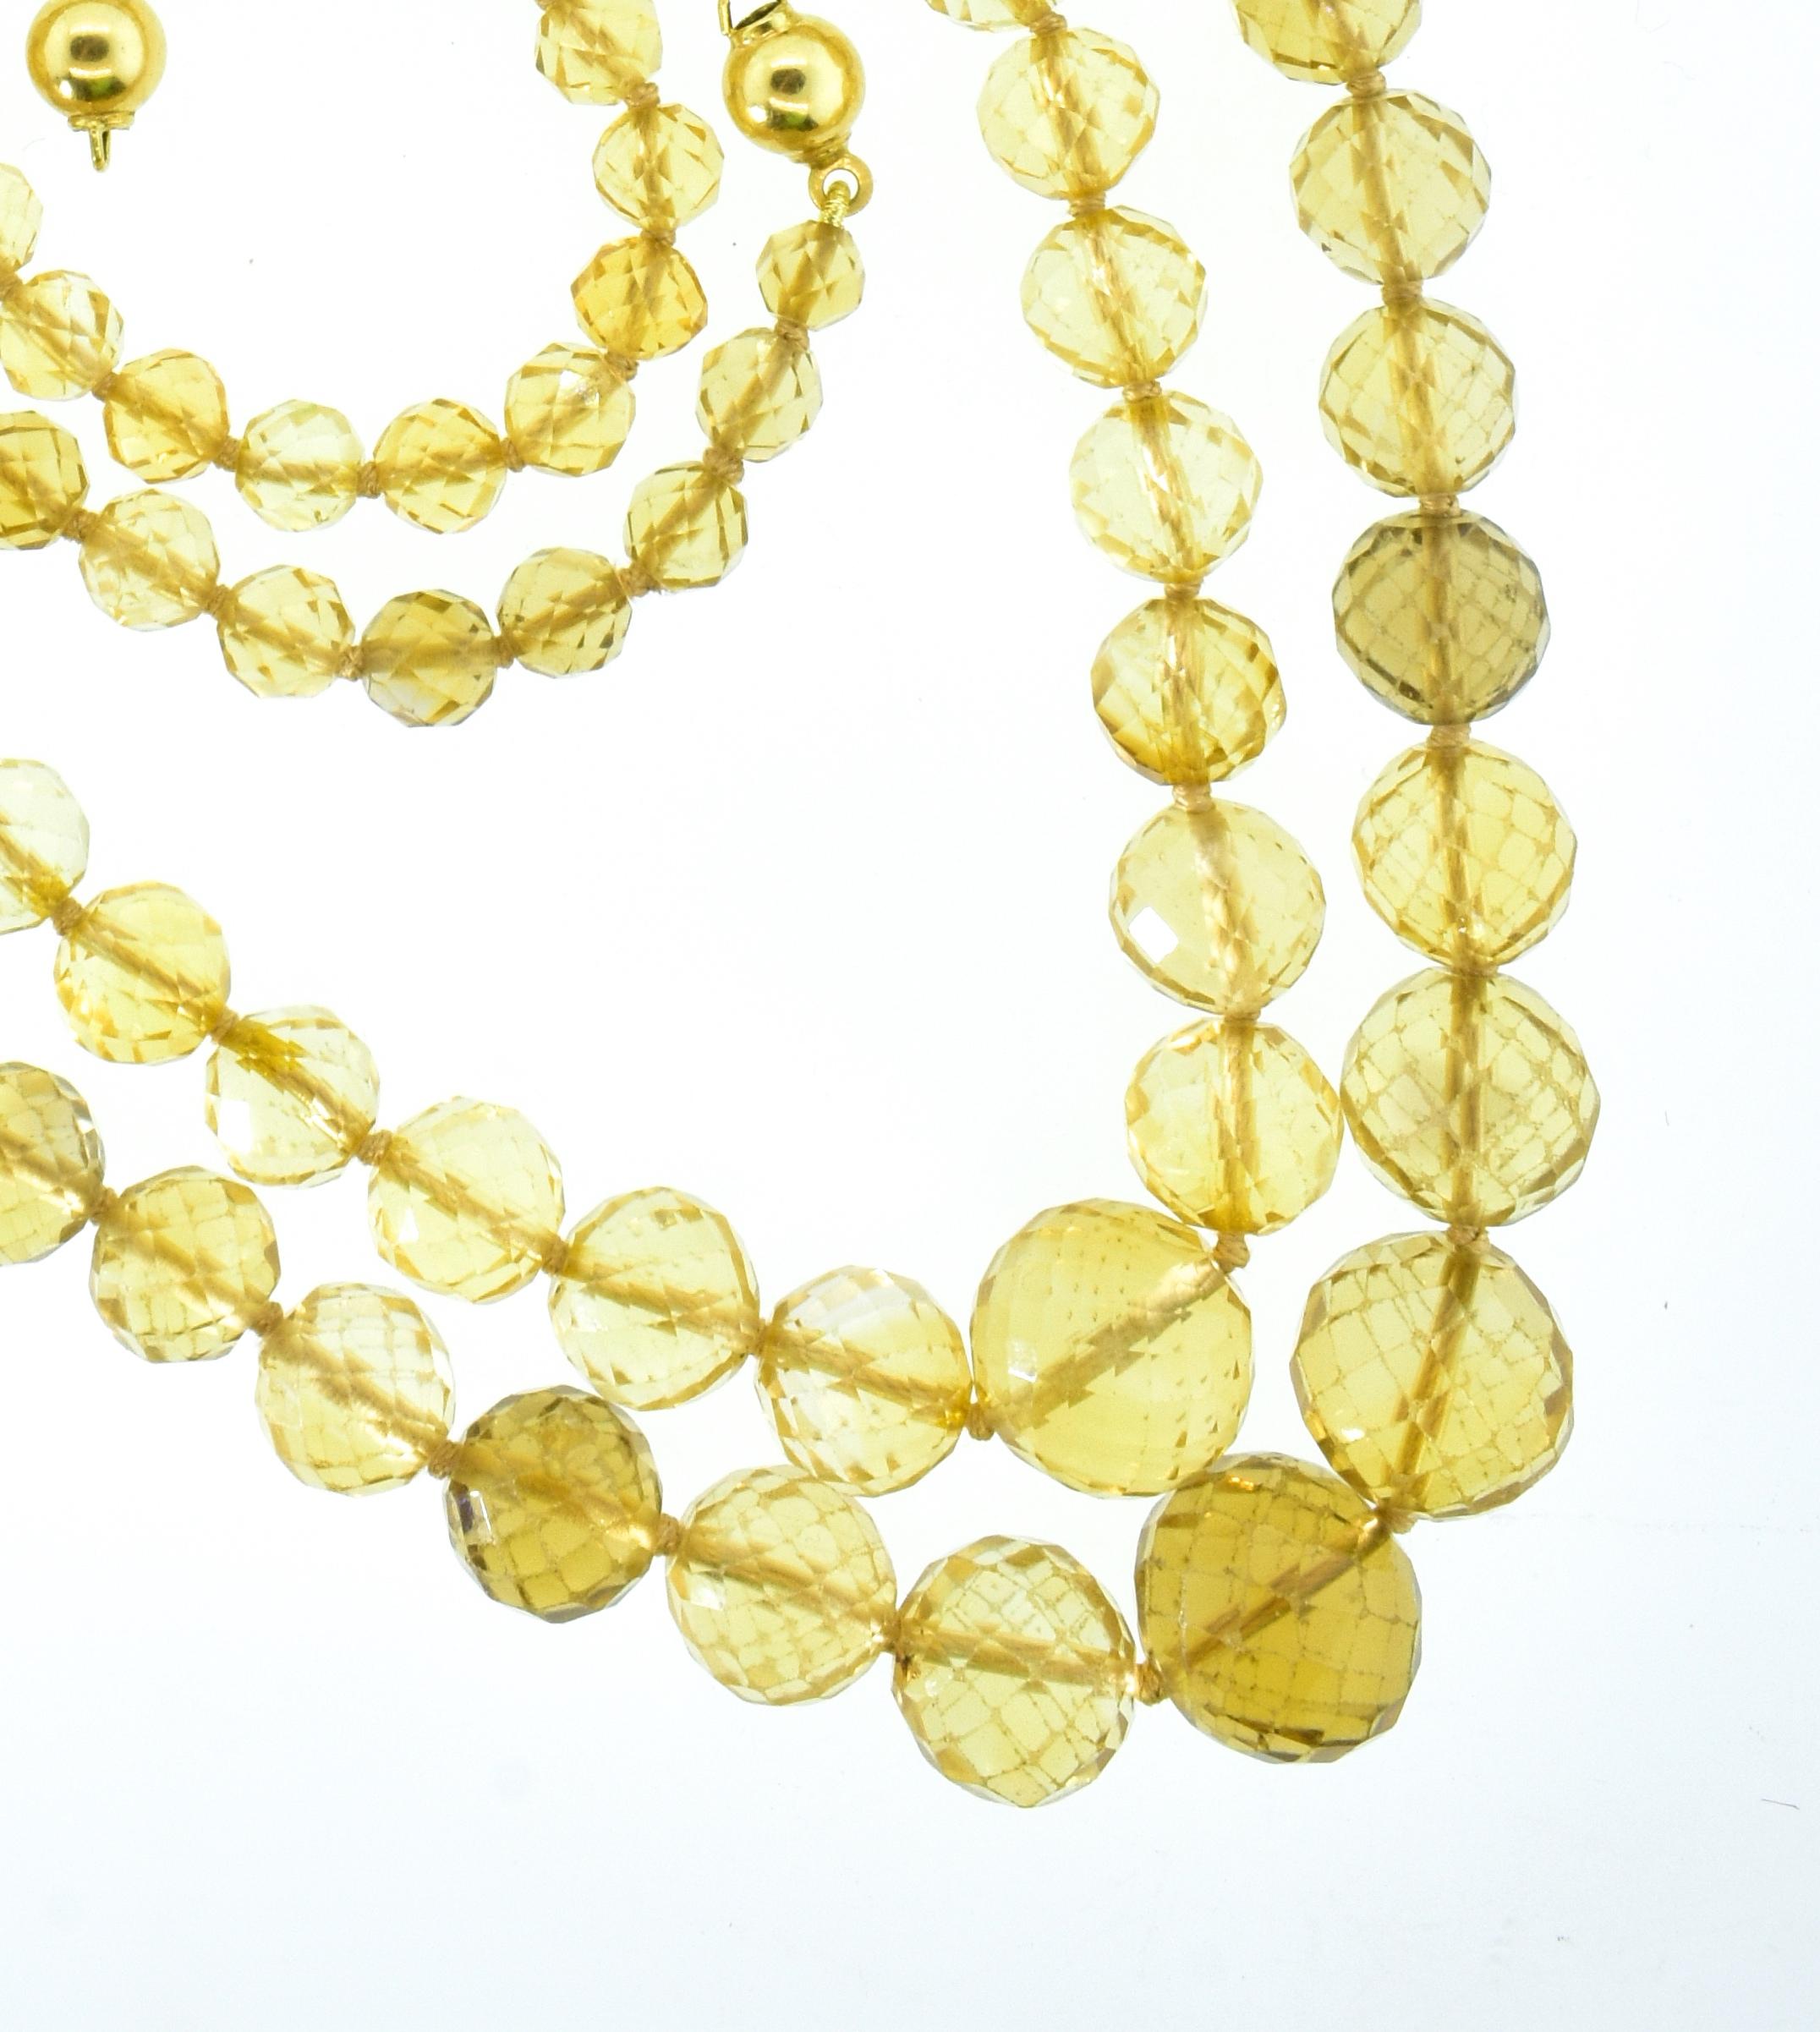 Citrine beads faceted and measuring 6 mm up to 16.2 mm, and 6.7 to 15.7mm. for the second strand.  The first strand is 27 inches in length and the second is 29 inches in length.  Therefore, these strands 